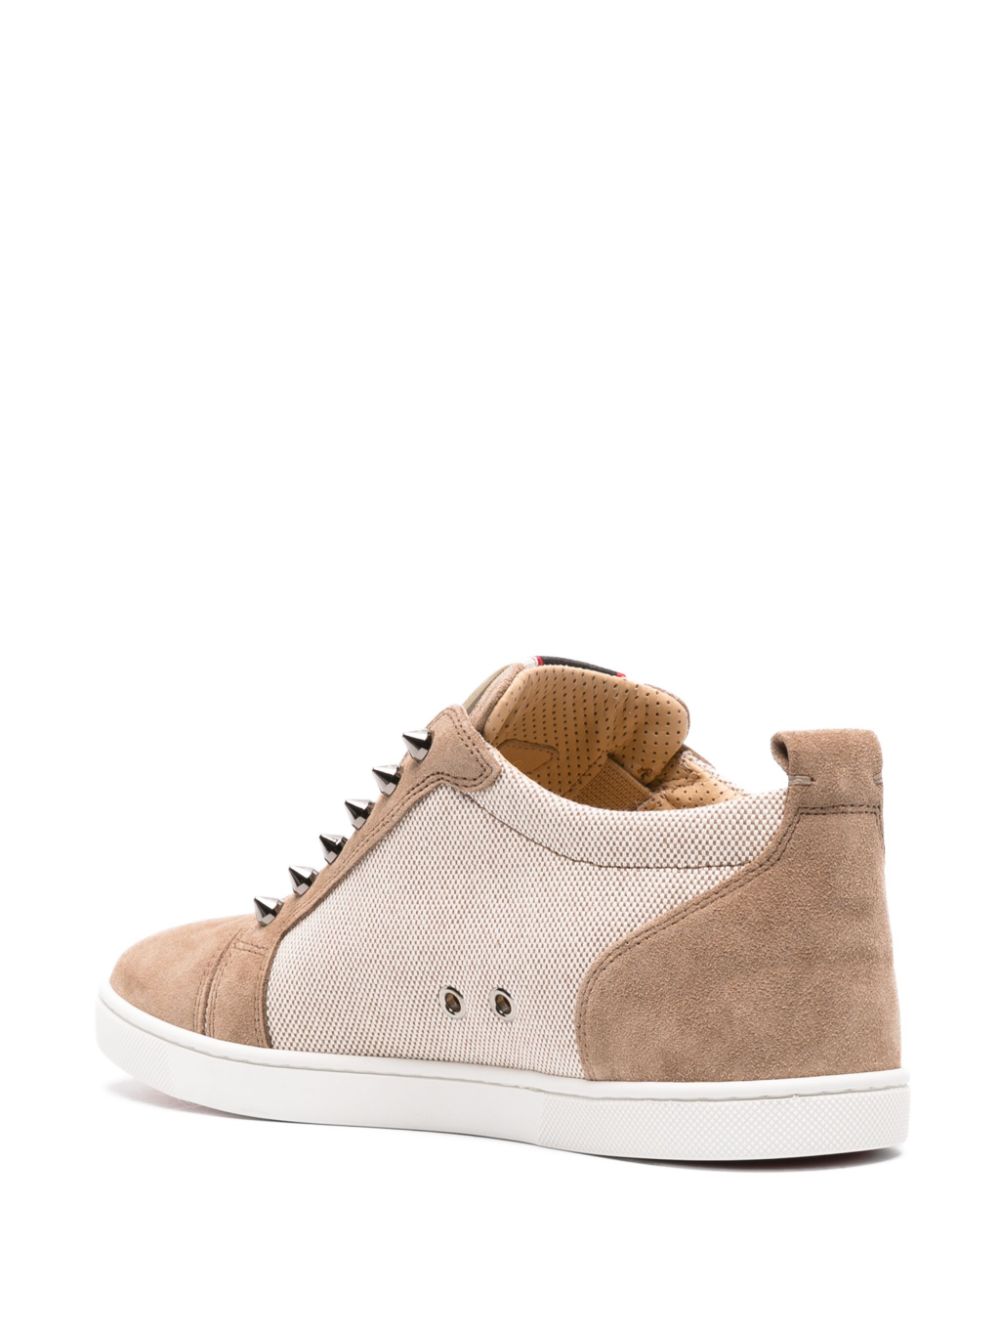 CHRISTIAN LOUBOUTIN Brown Low-Top Sneakers for Men, with Spike Stud Detailing and Logo Patch